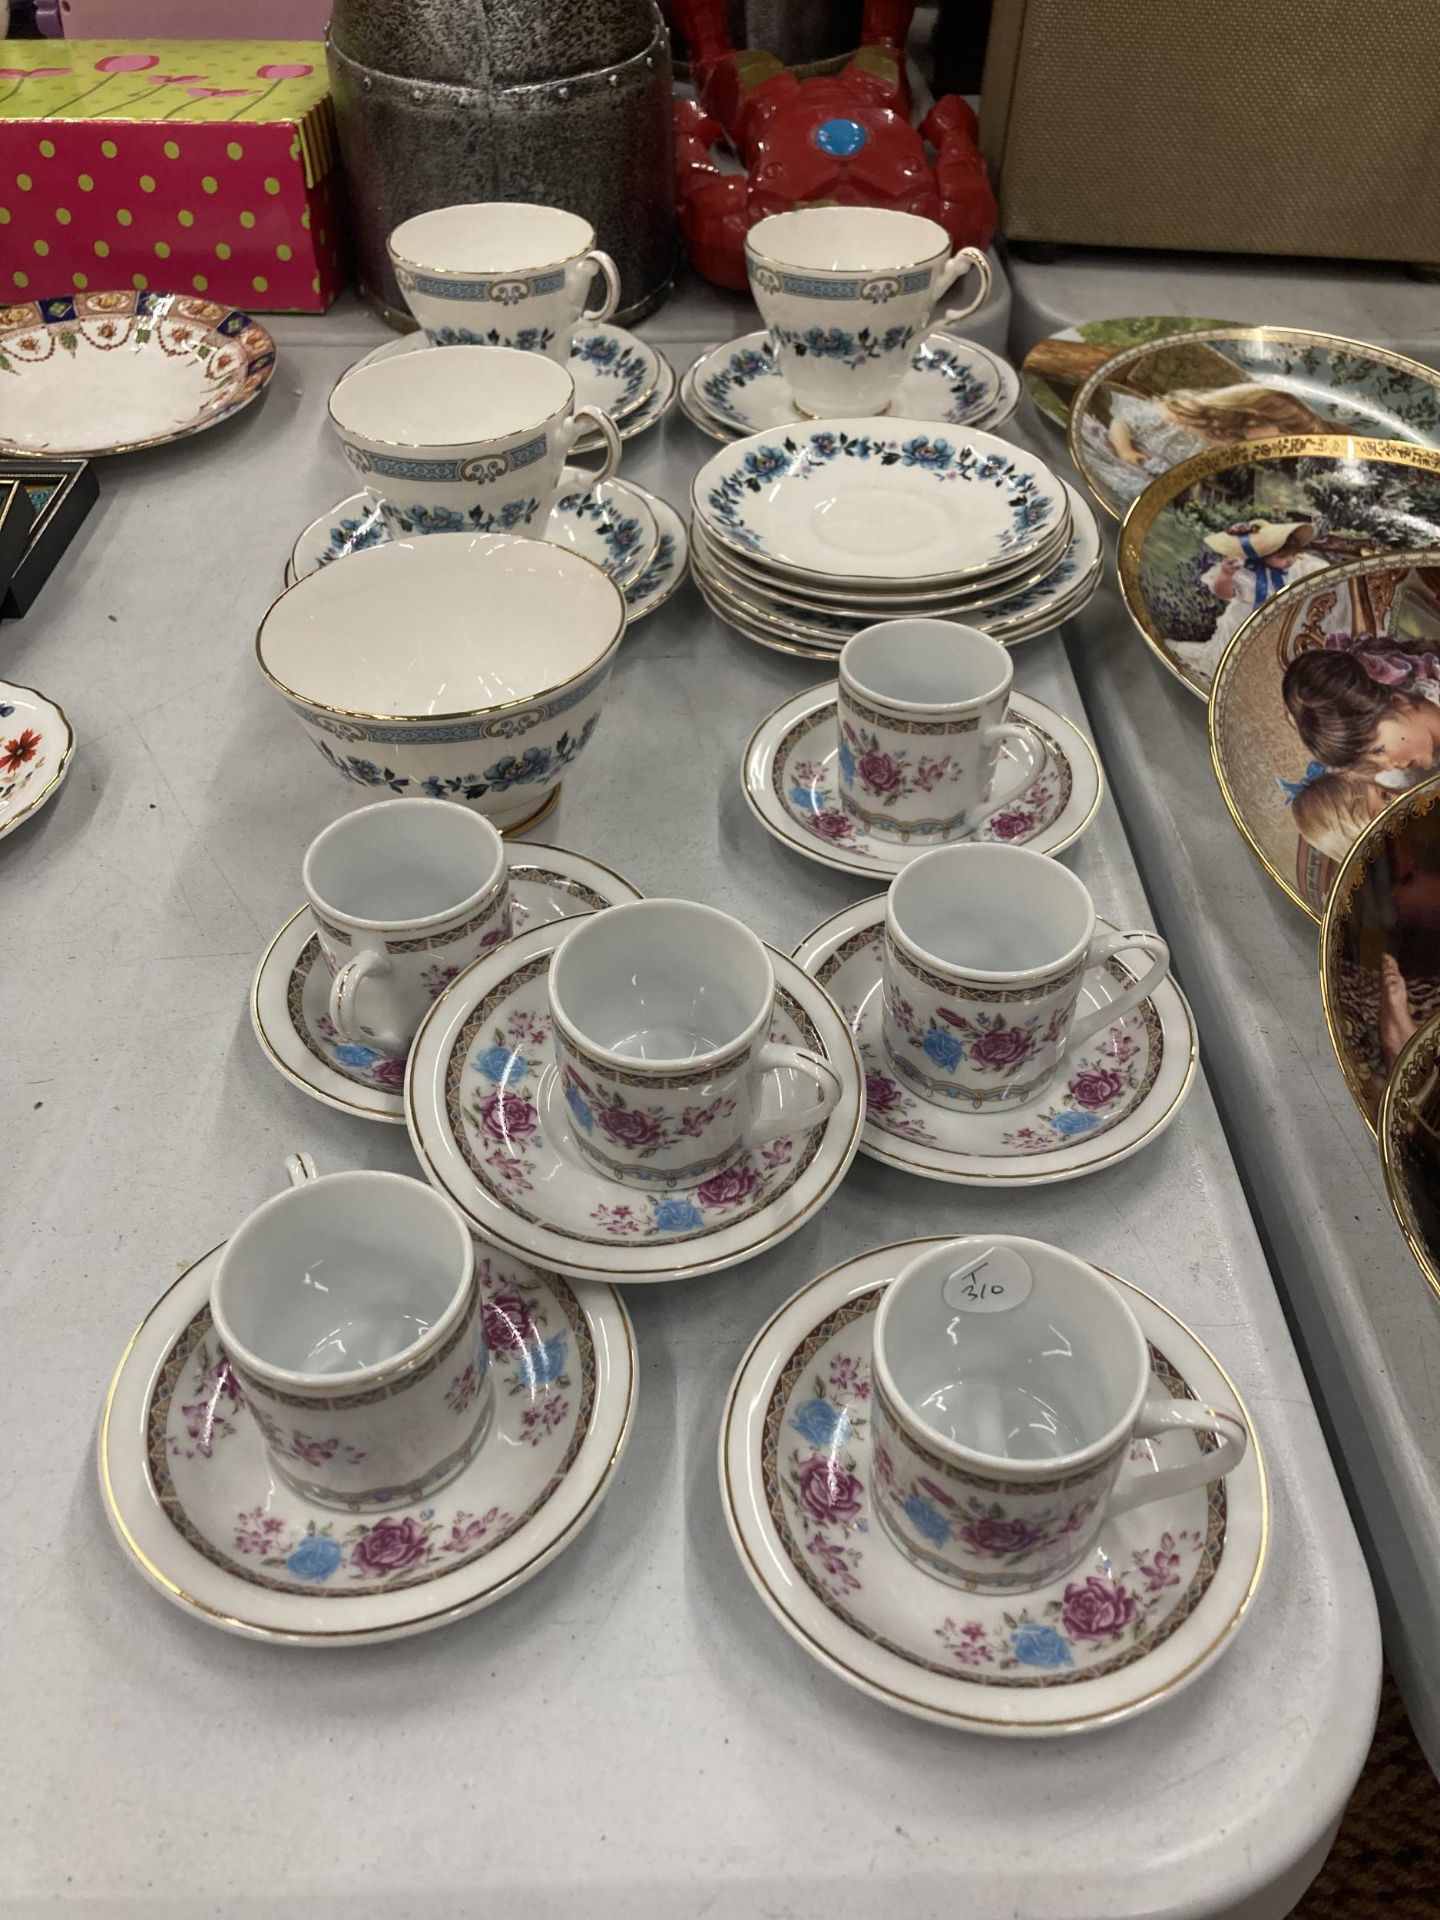 A QUANTITY OF CHINA CUPS AND SAUCERS PLUS A SUGAR BOWL